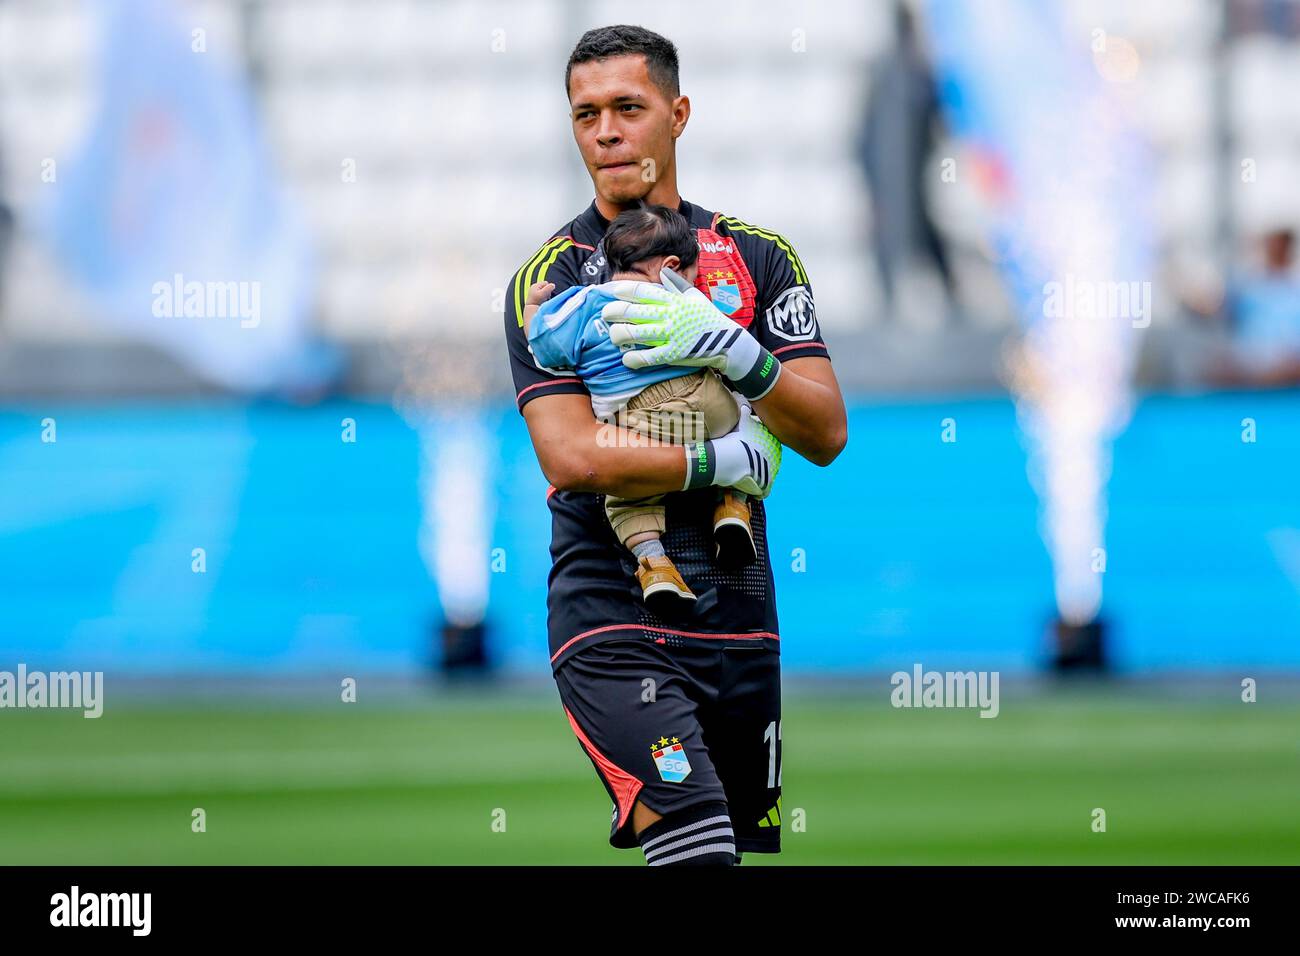 Lima, Peru. 14th Jan, 2024. Renato Solis of Sporting Cristal during the friendly match between Sporting Cristal and Universidad Catolica de Chile played at Nacional Stadium on January 14, 2024 in Lima, Peru. (Photo by Miguel Marrufo/PRESSINPHOTO) Credit: PRESSINPHOTO SPORTS AGENCY/Alamy Live News Stock Photo